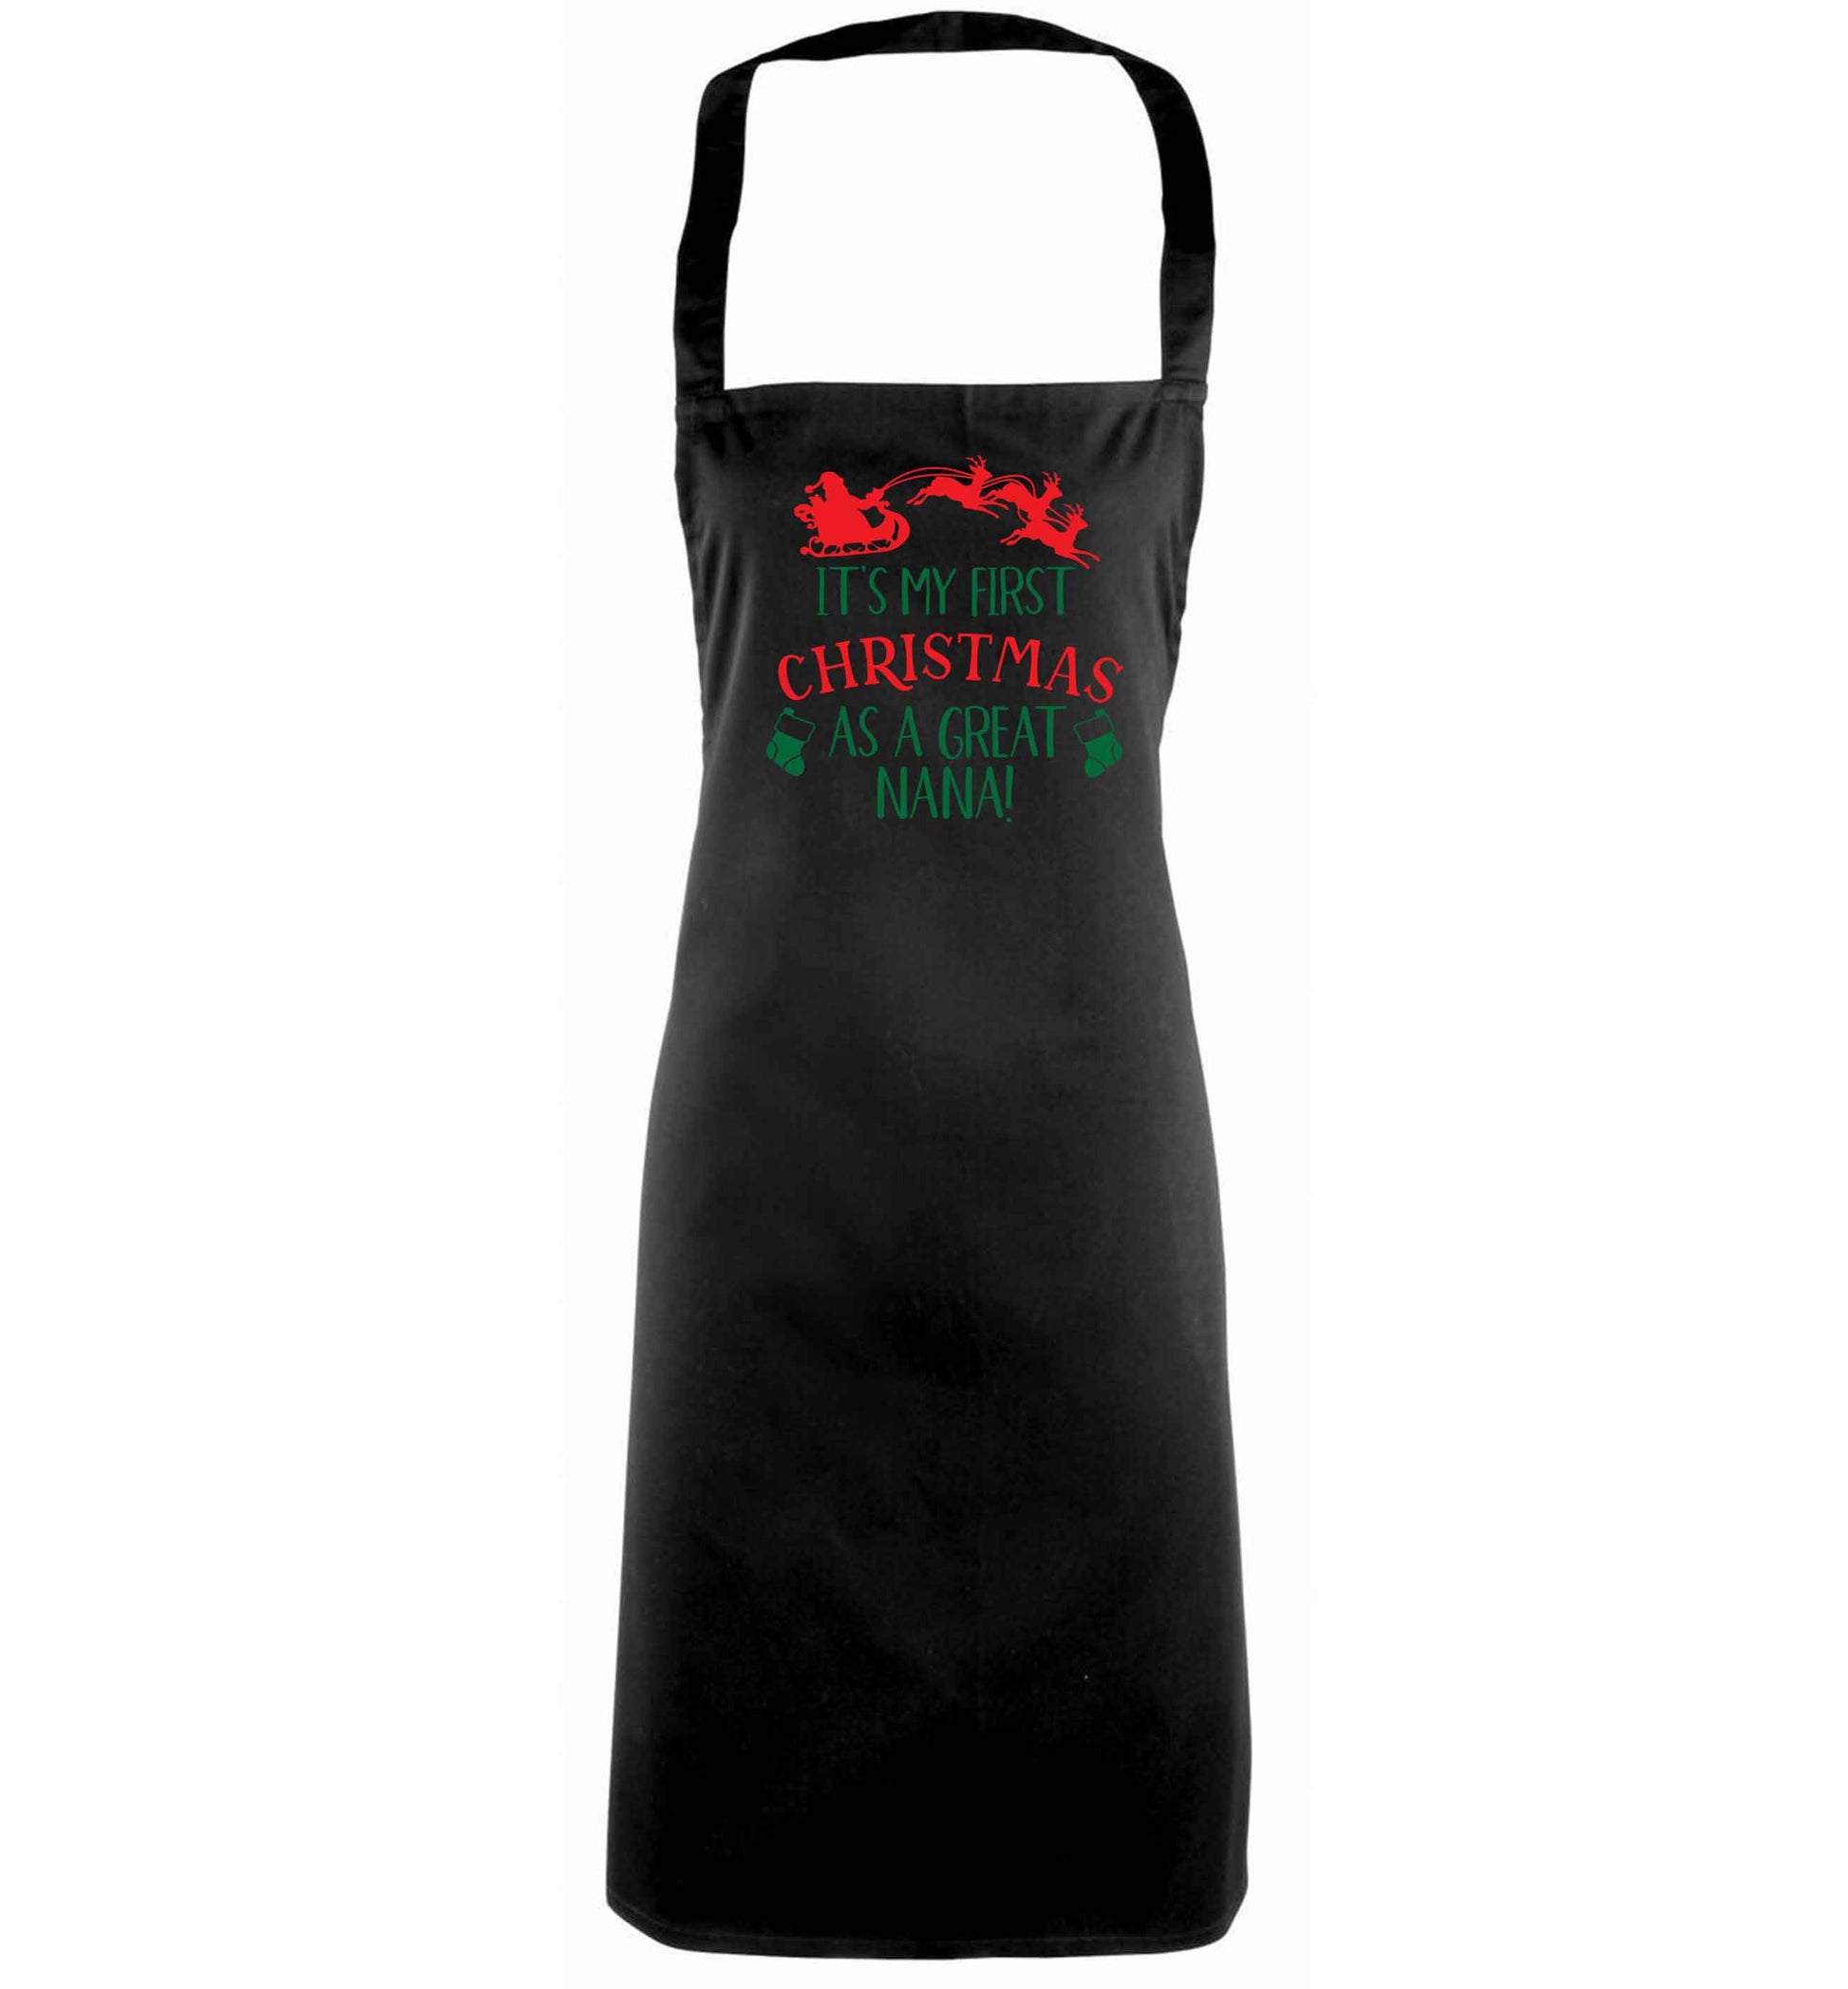 It's my first Christmas as a great nana! black apron